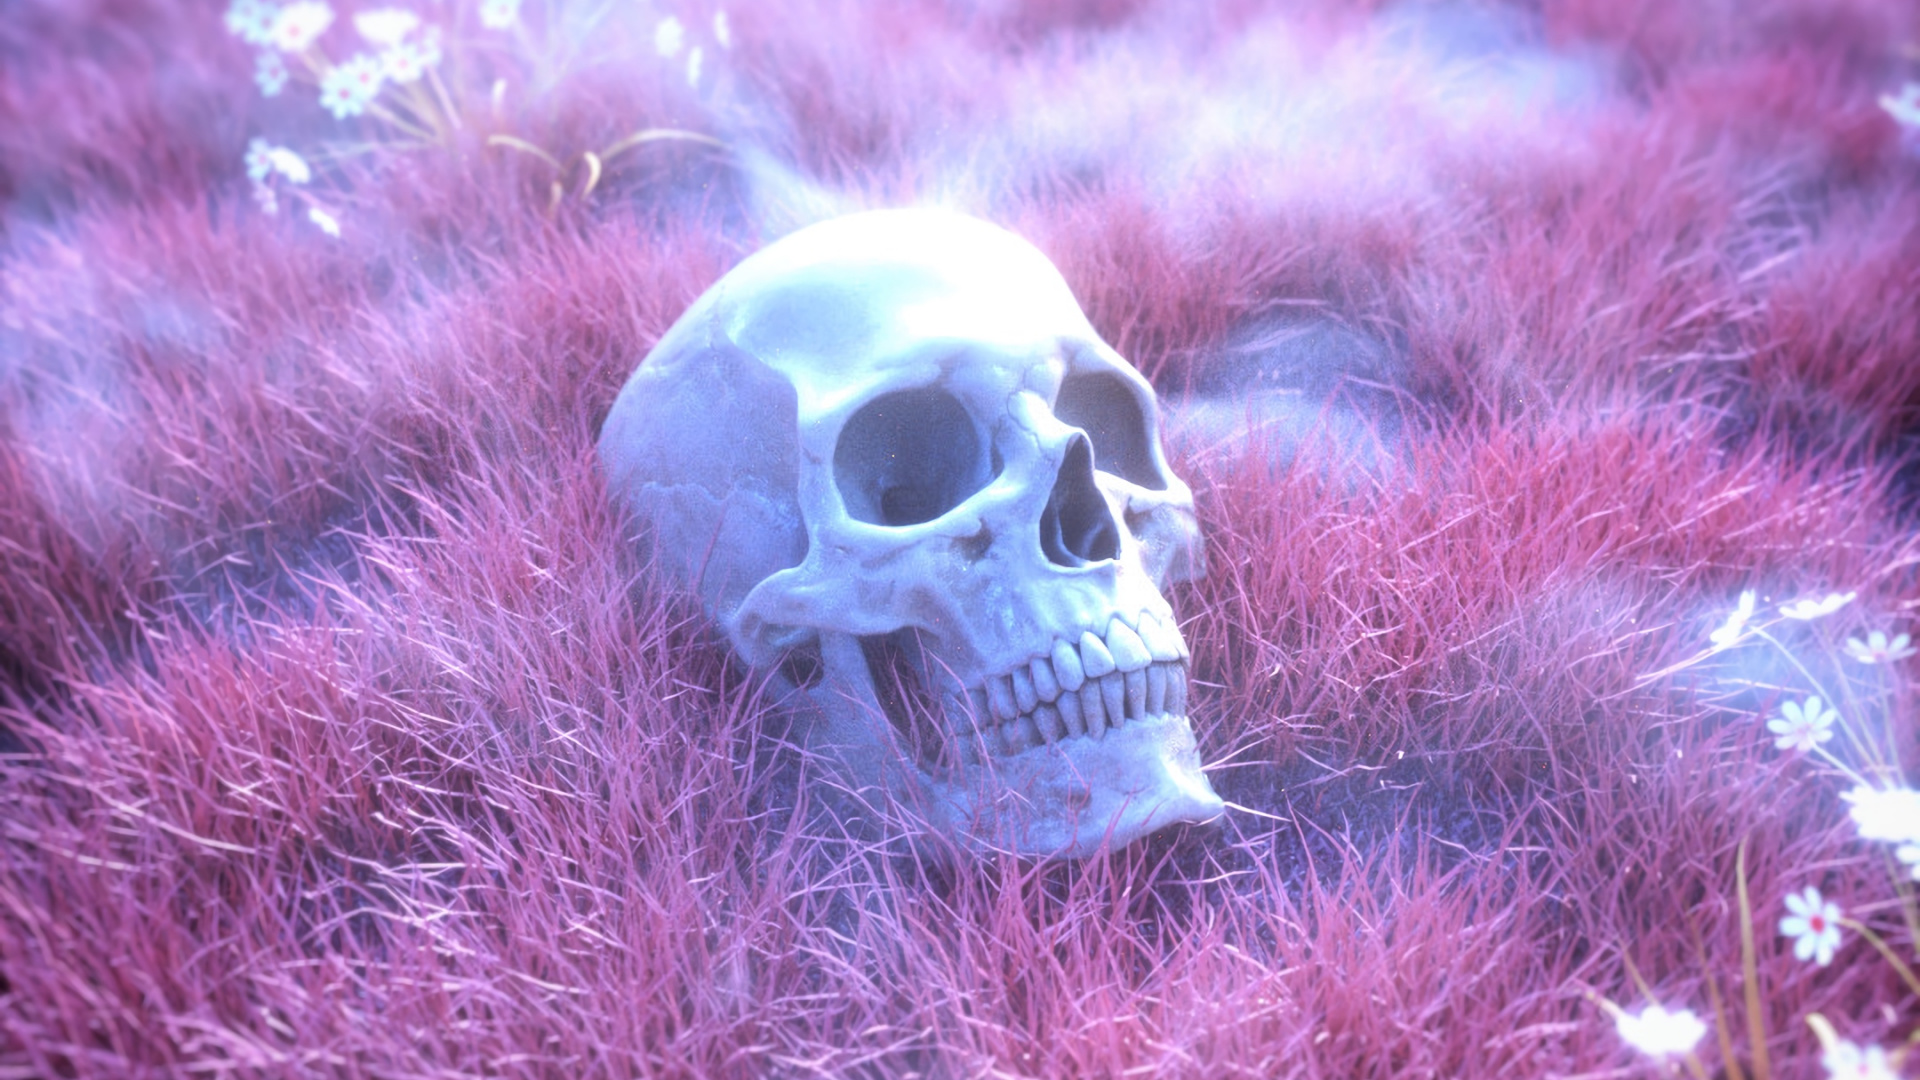 White and Brown Skull on Green Grass. Wallpaper in 1920x1080 Resolution